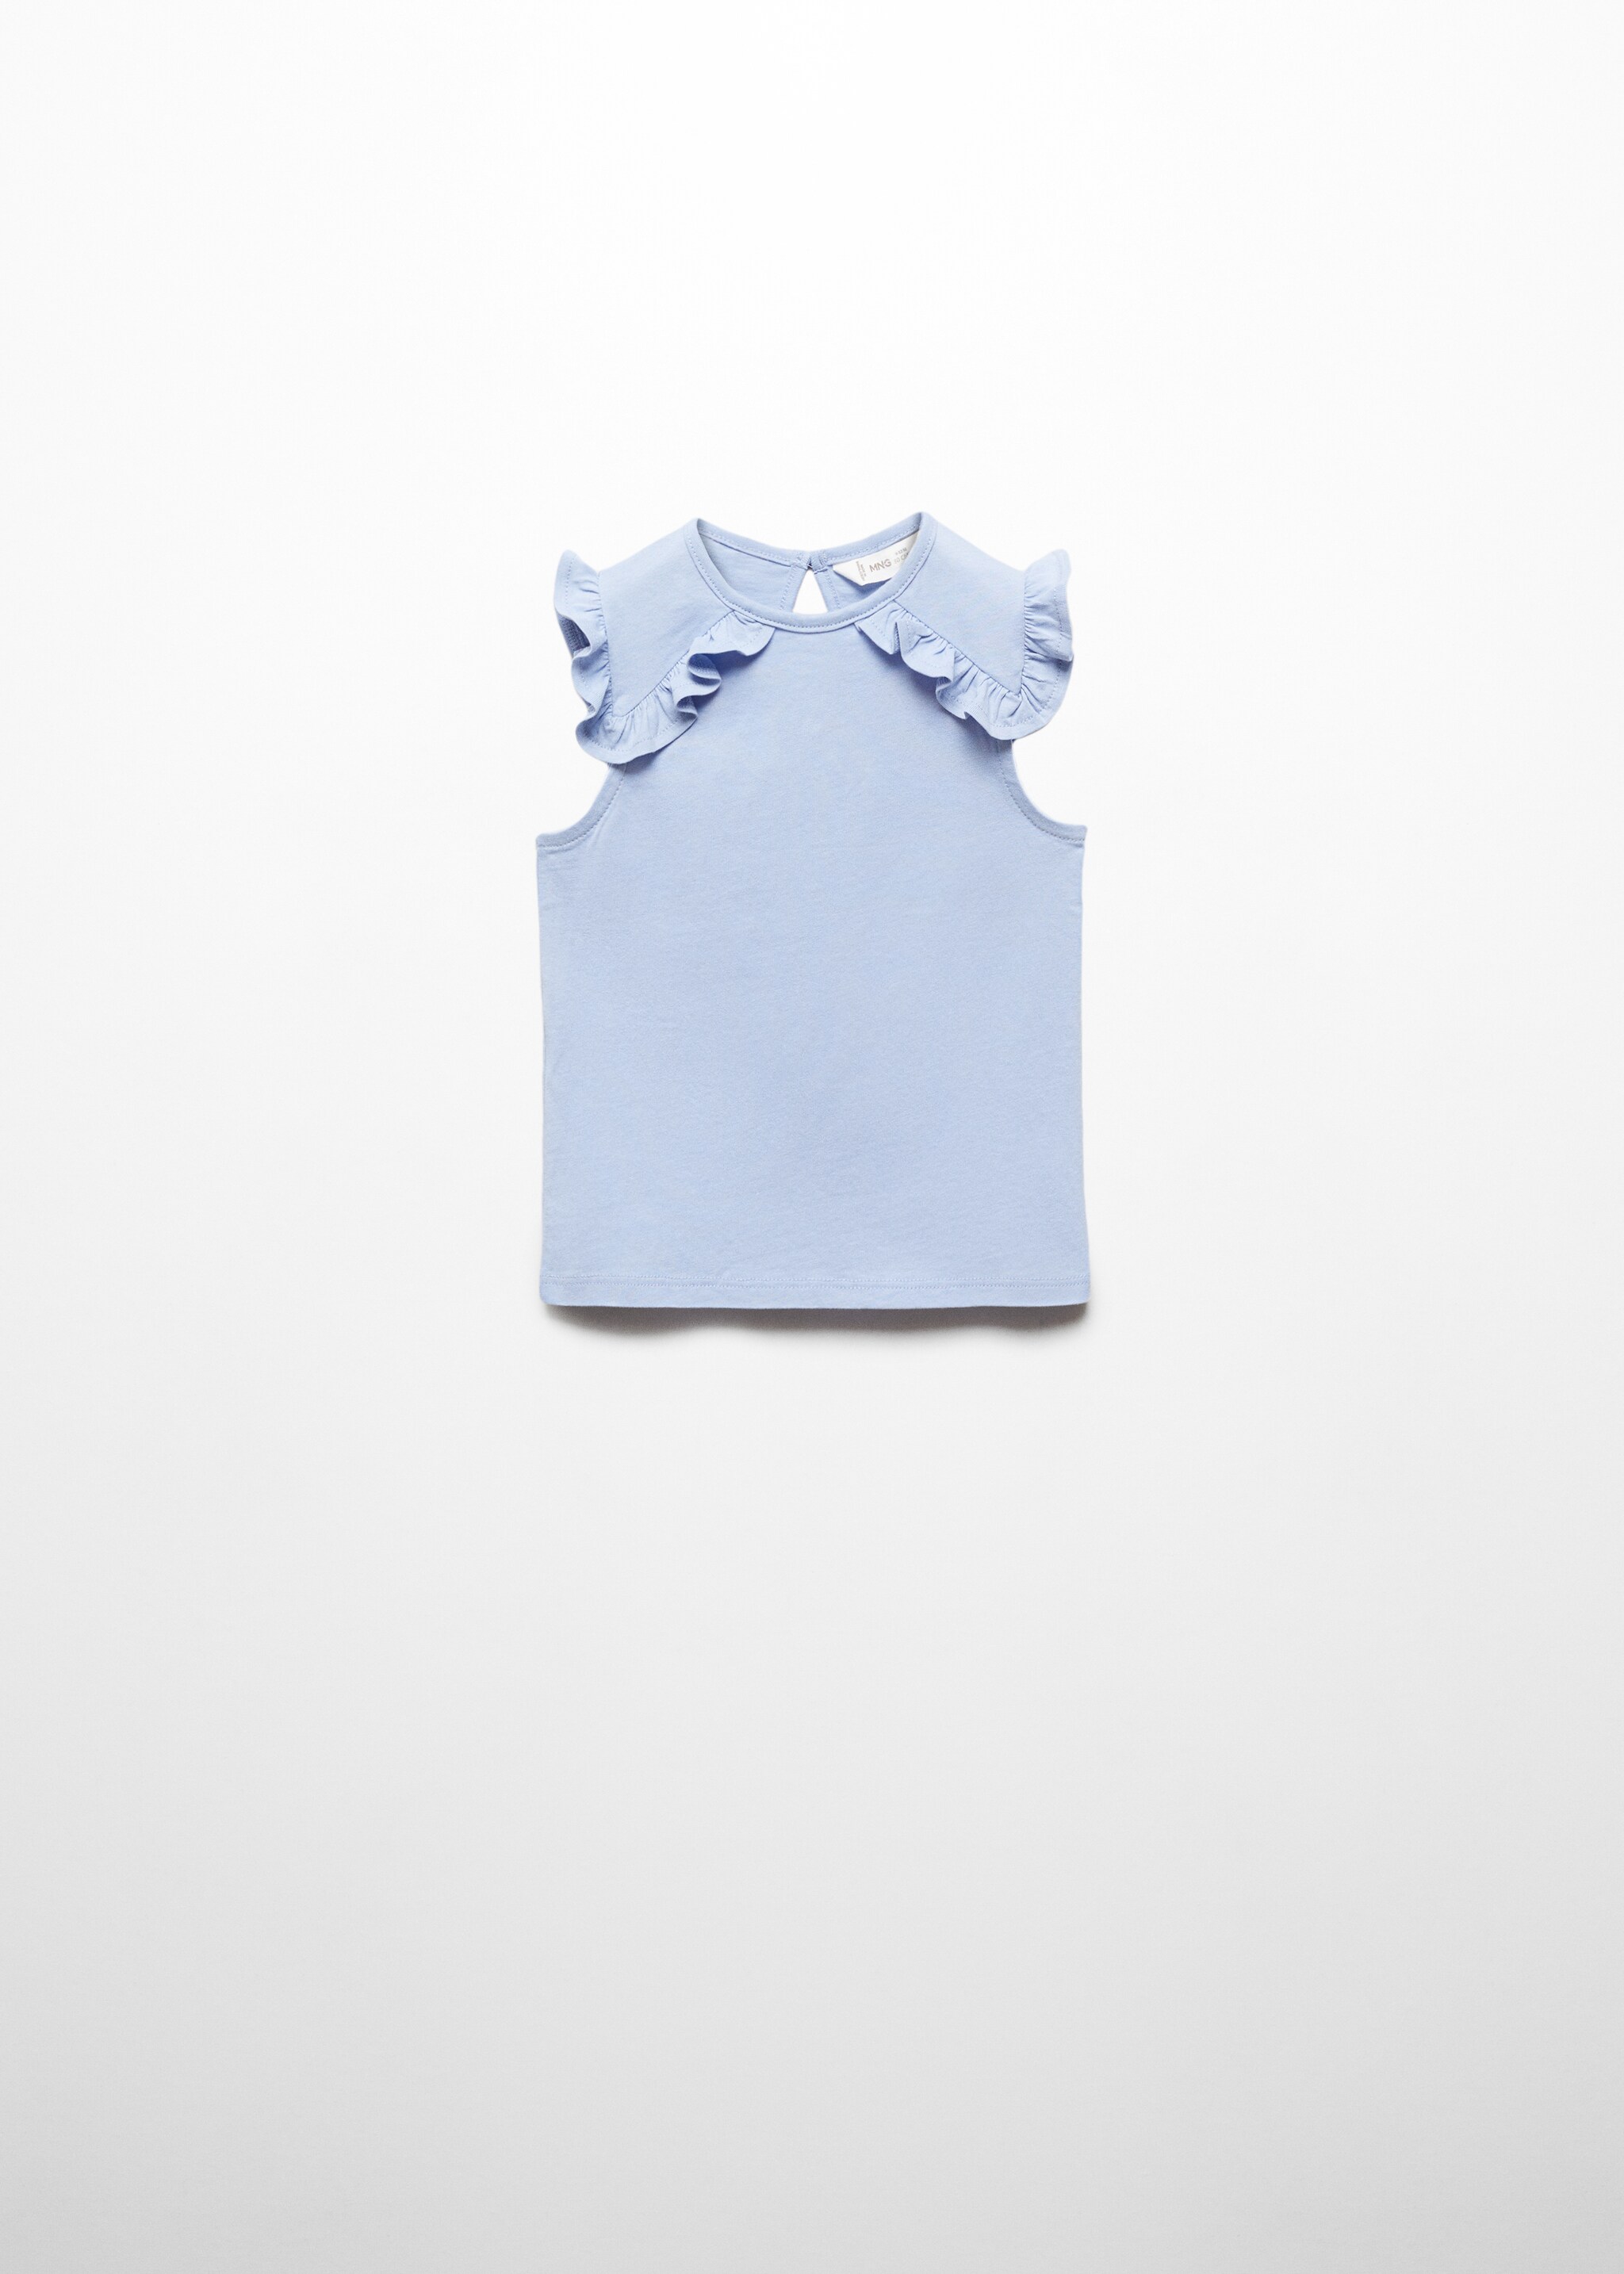 Frills cotton t-shirt - Article without model